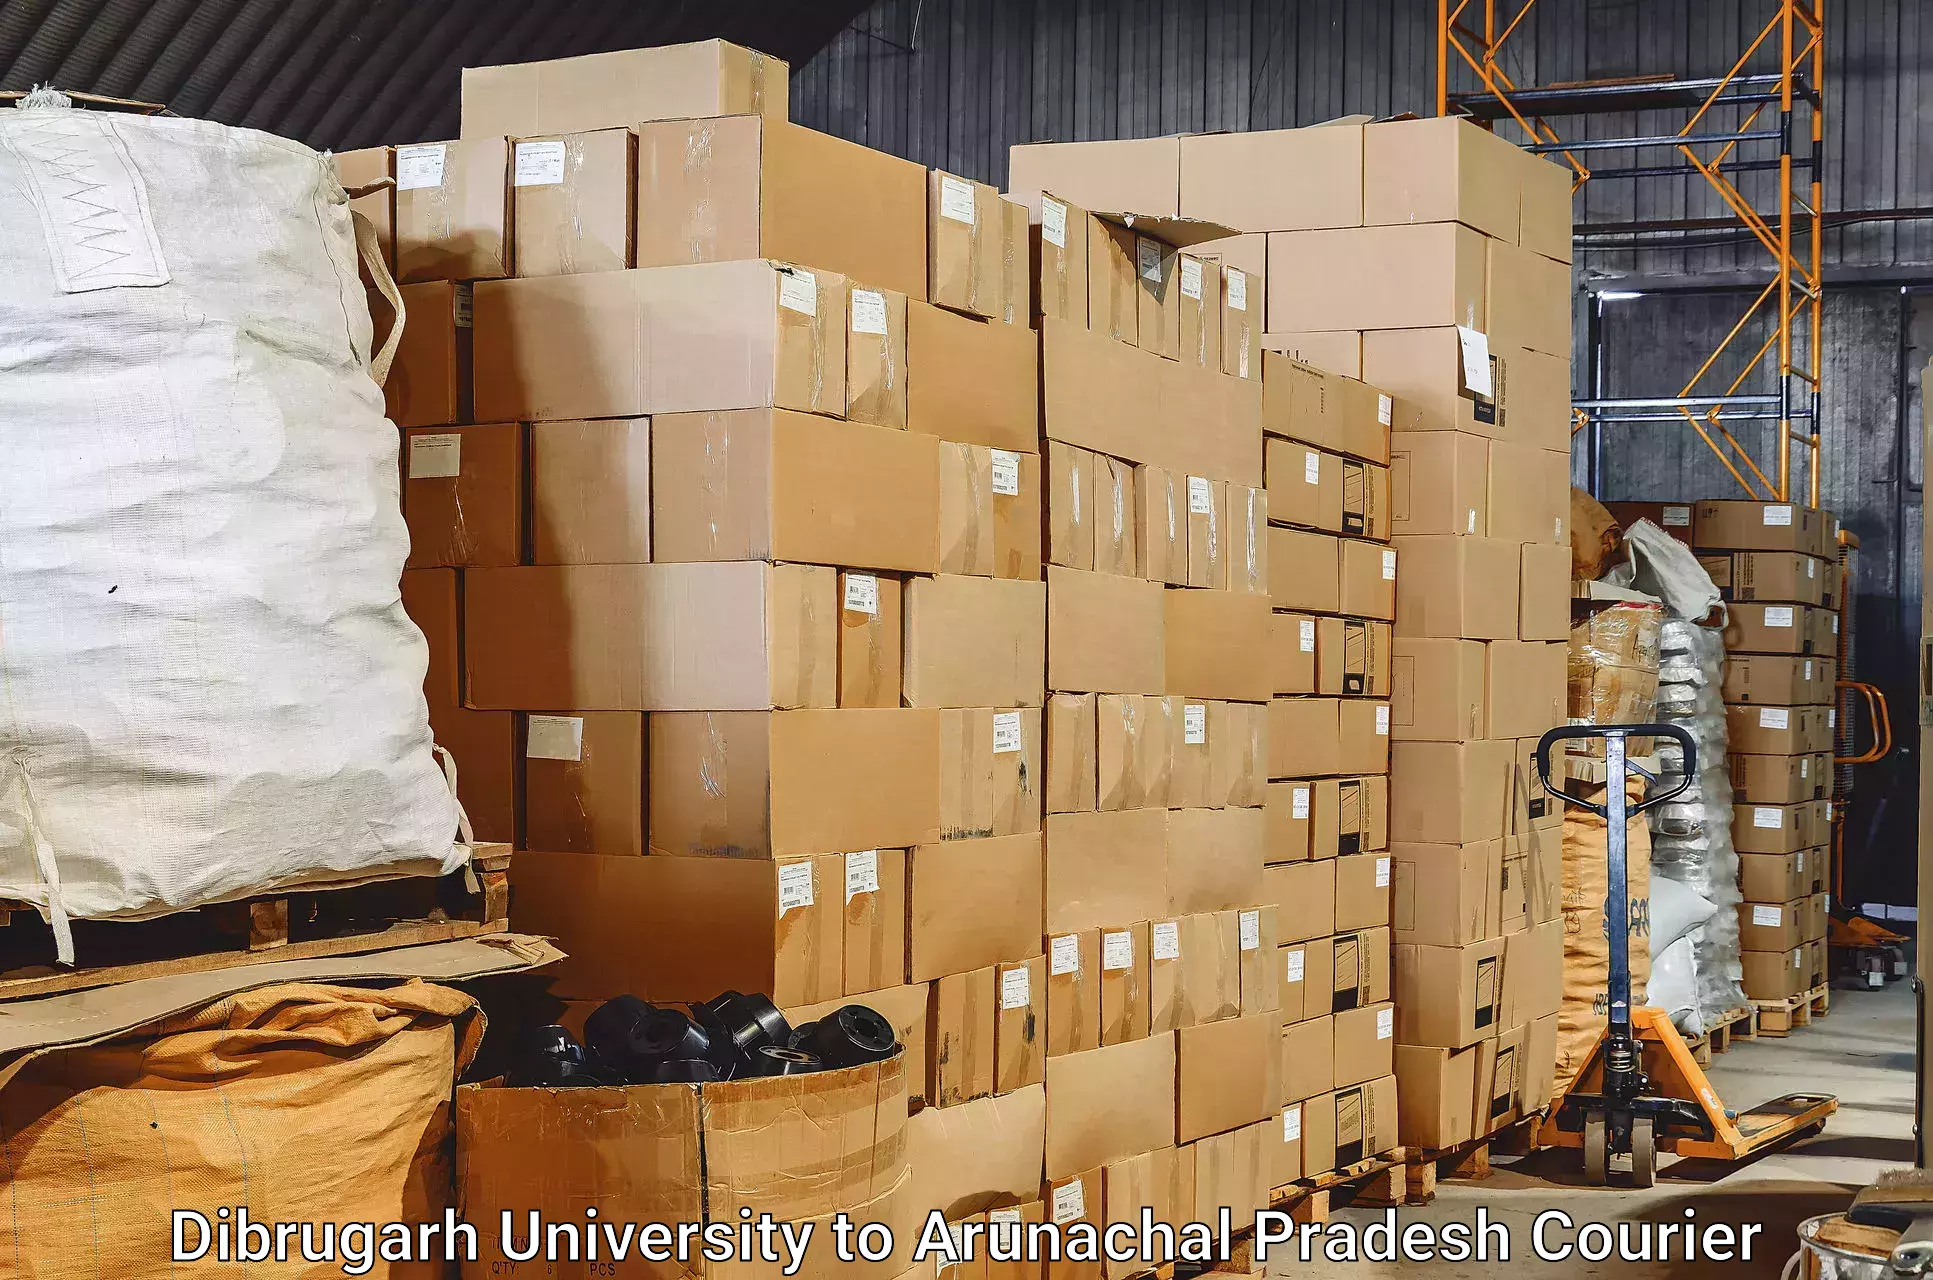 Baggage delivery management in Dibrugarh University to Yingkiong